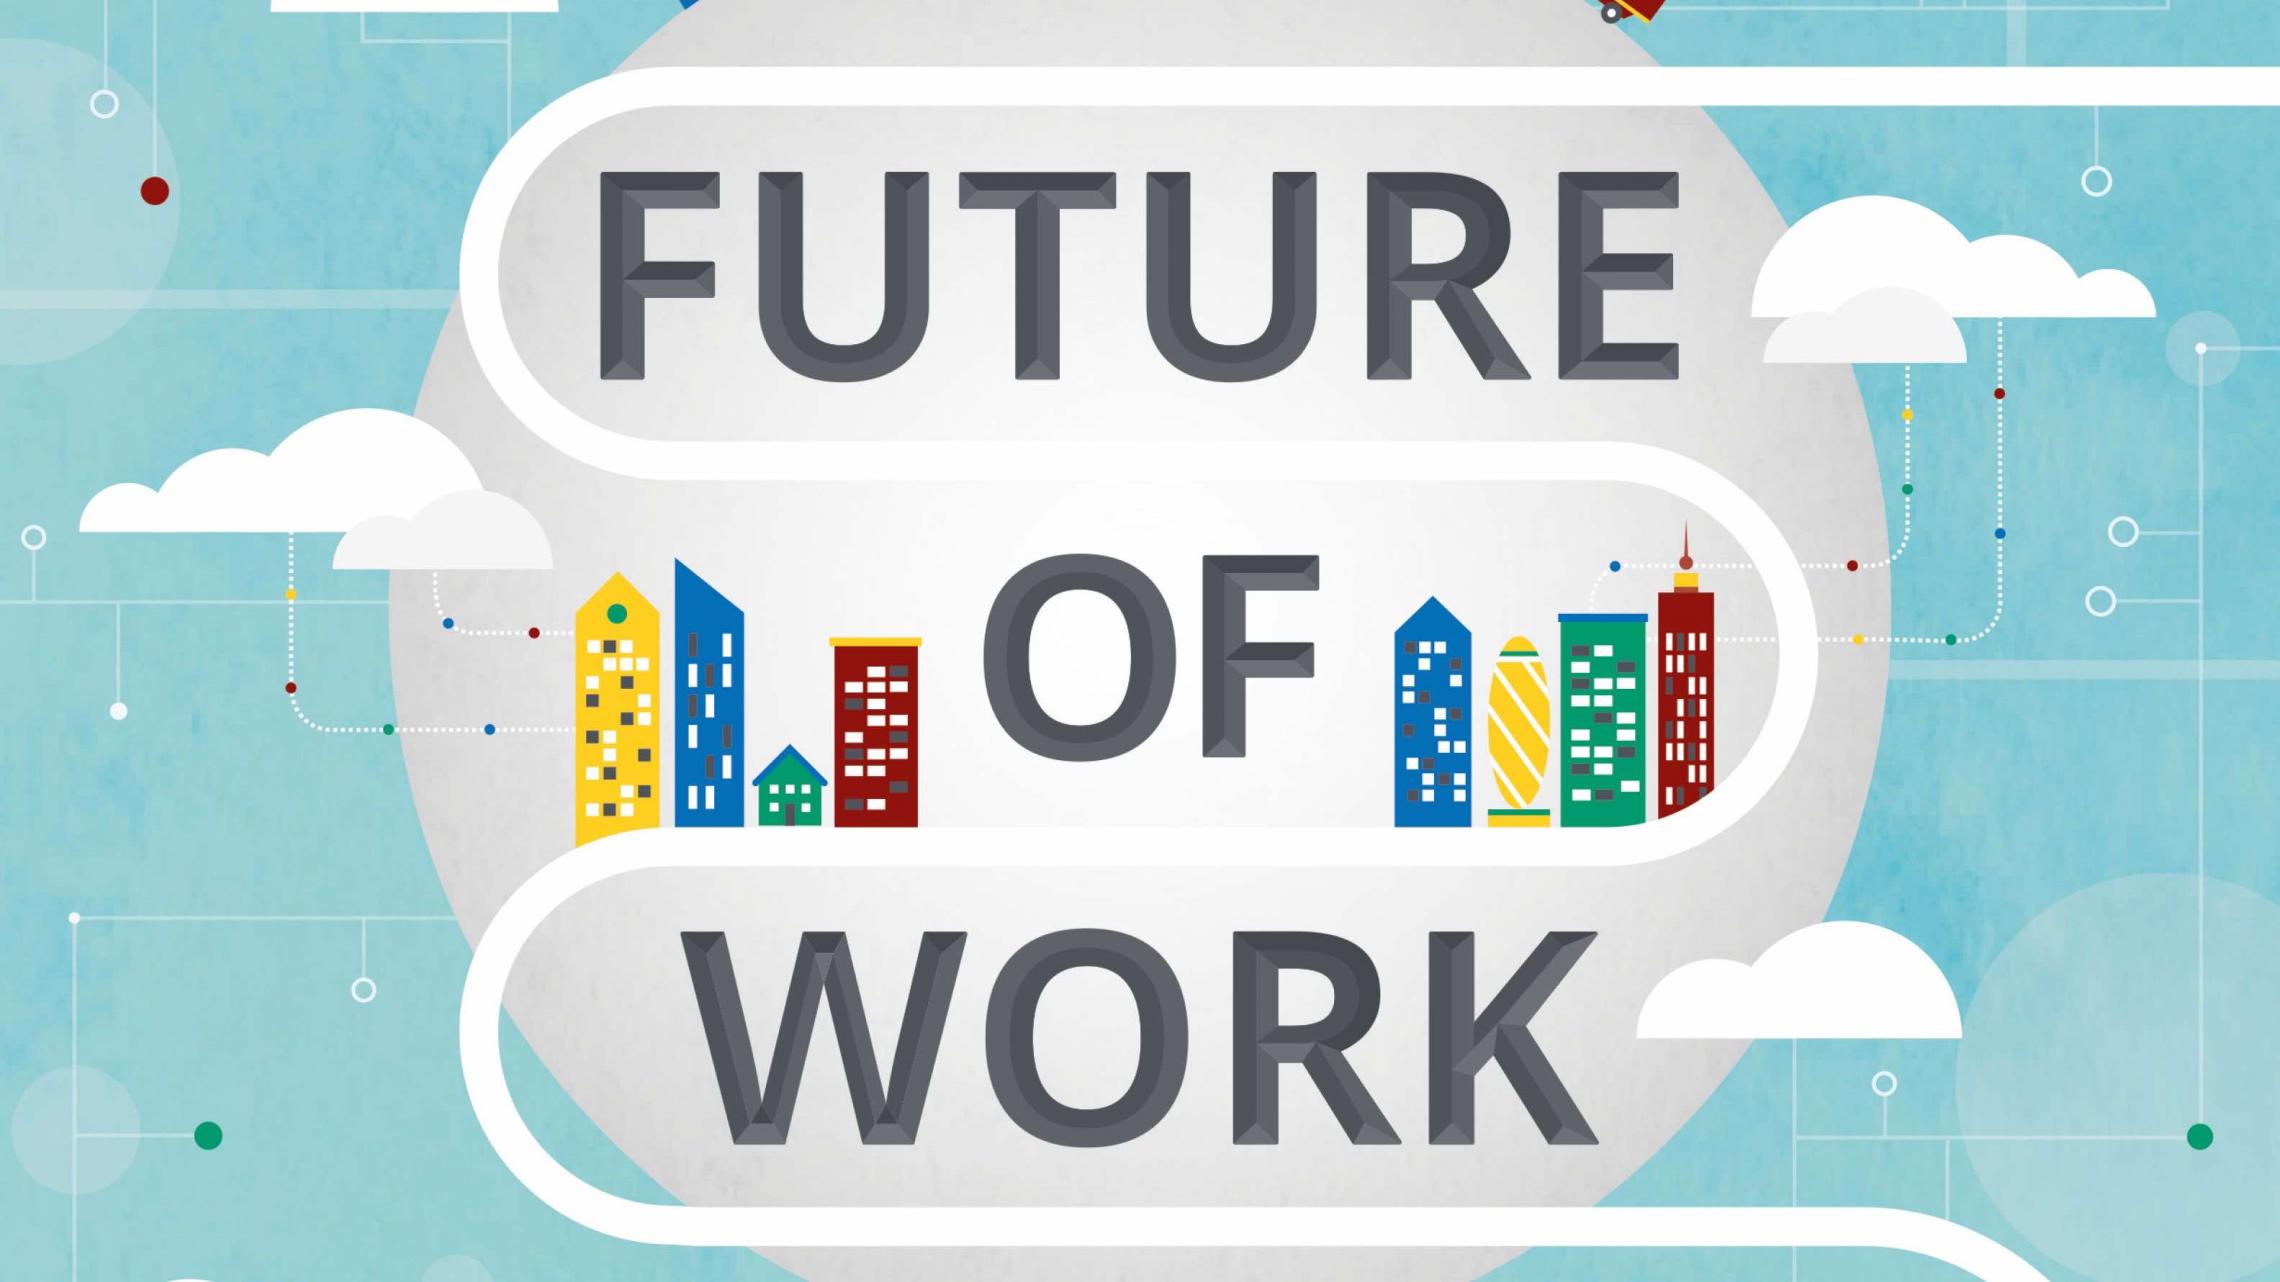 The Future of Work Is Almost Here: 4 Facts from the "Future of Jobs" Report